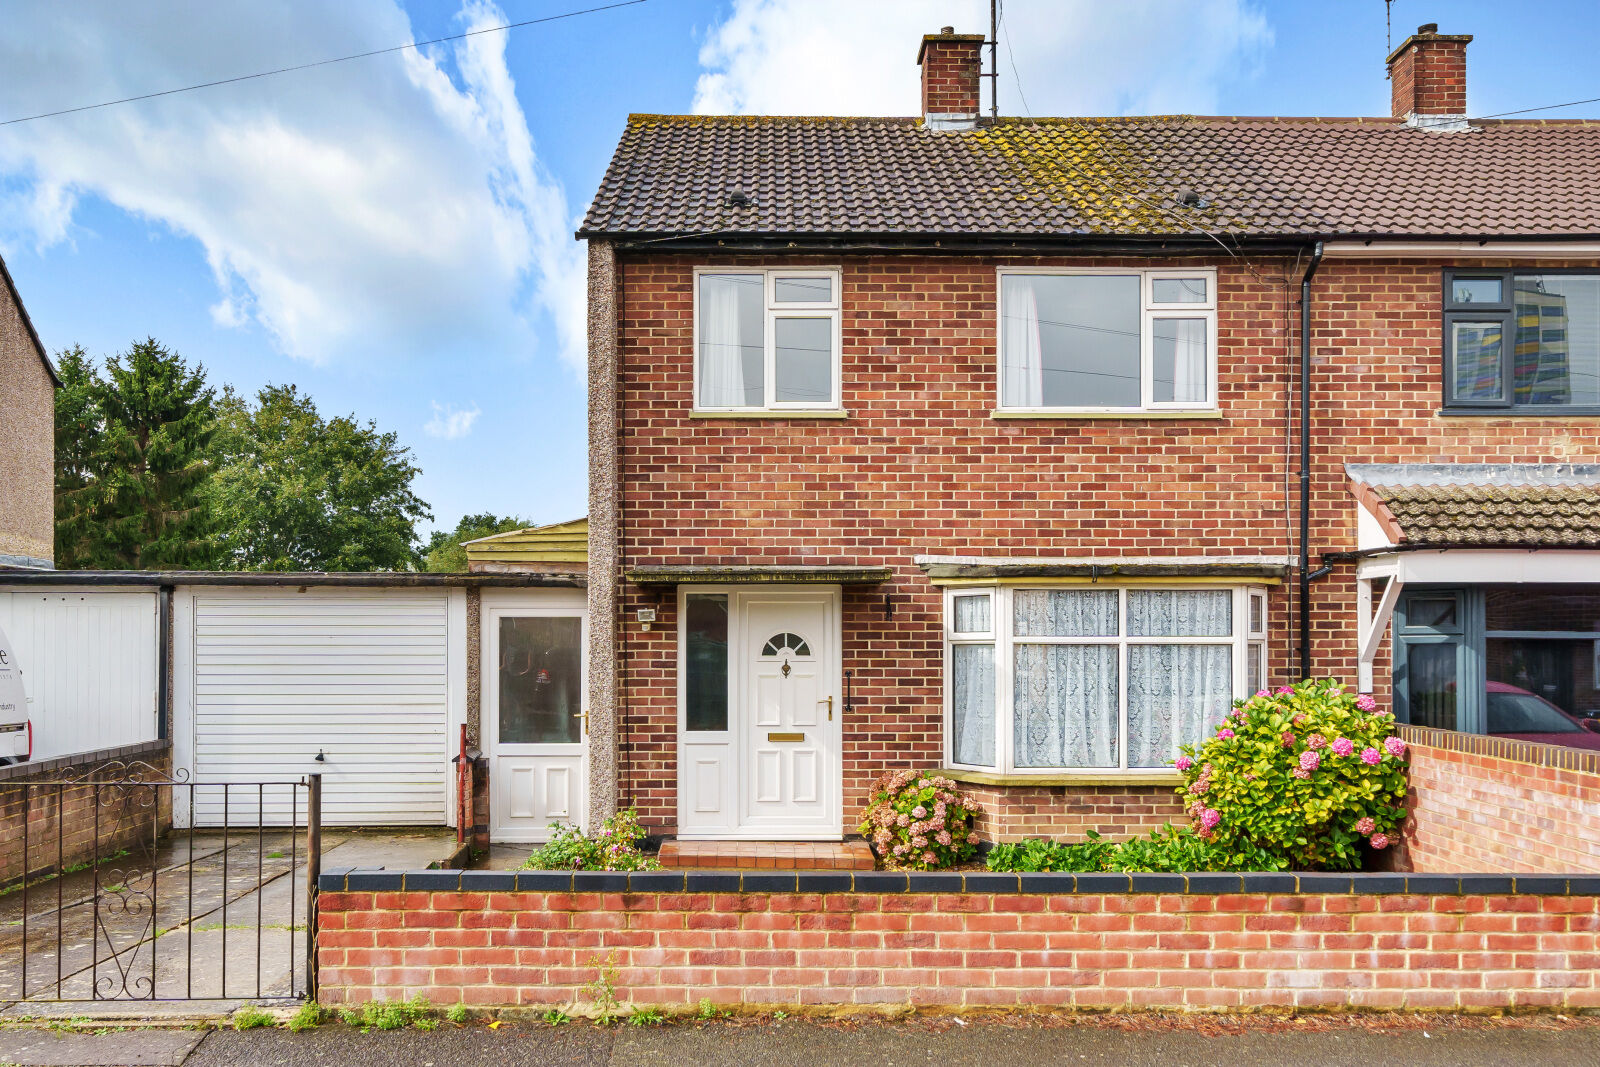 3 bedroom semi detached house for sale Merlin Road, Oxford, OX4, main image